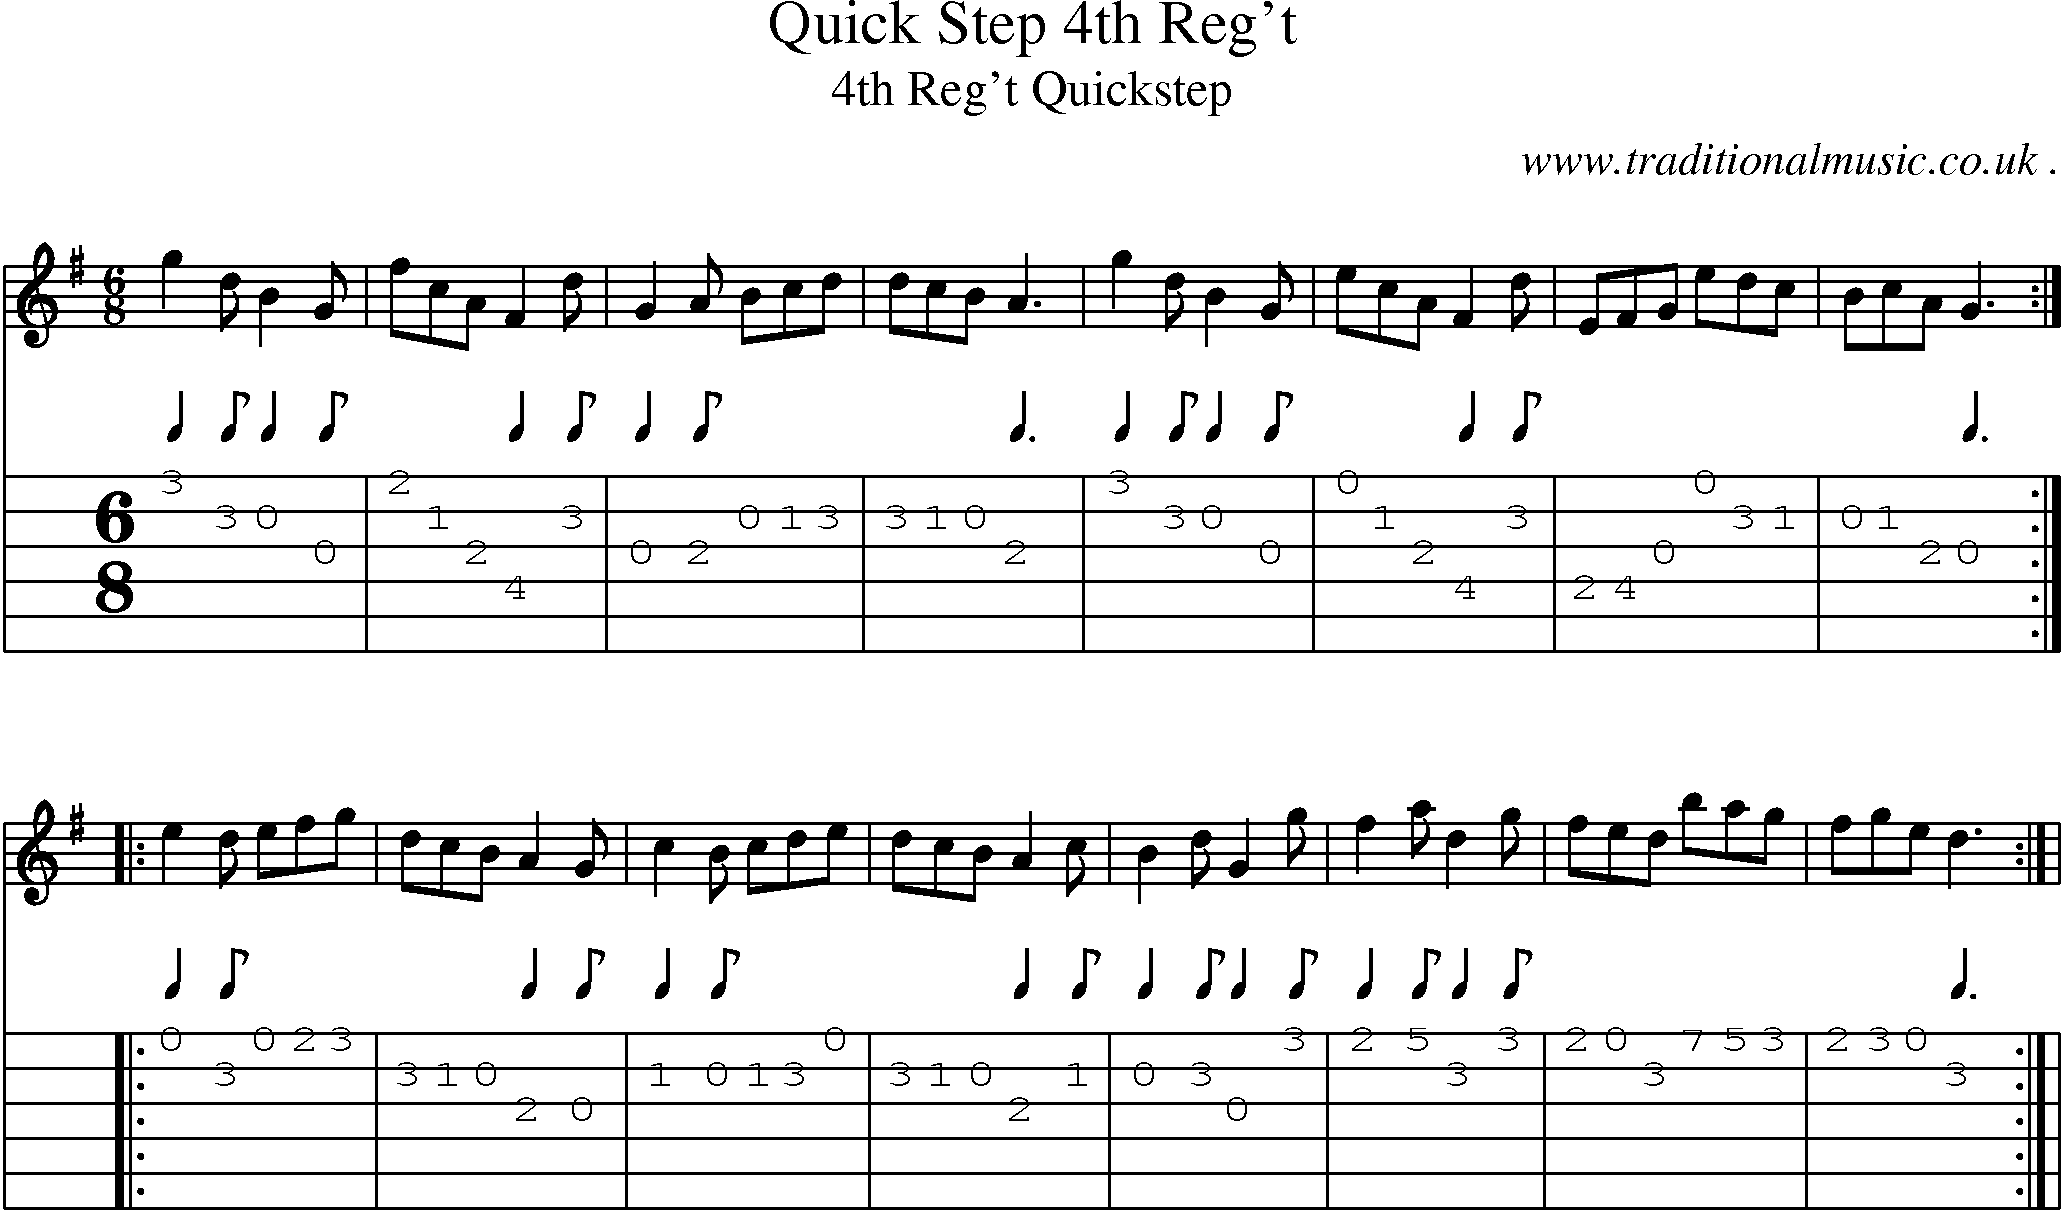 Sheet-Music and Guitar Tabs for Quick Step 4th Reg